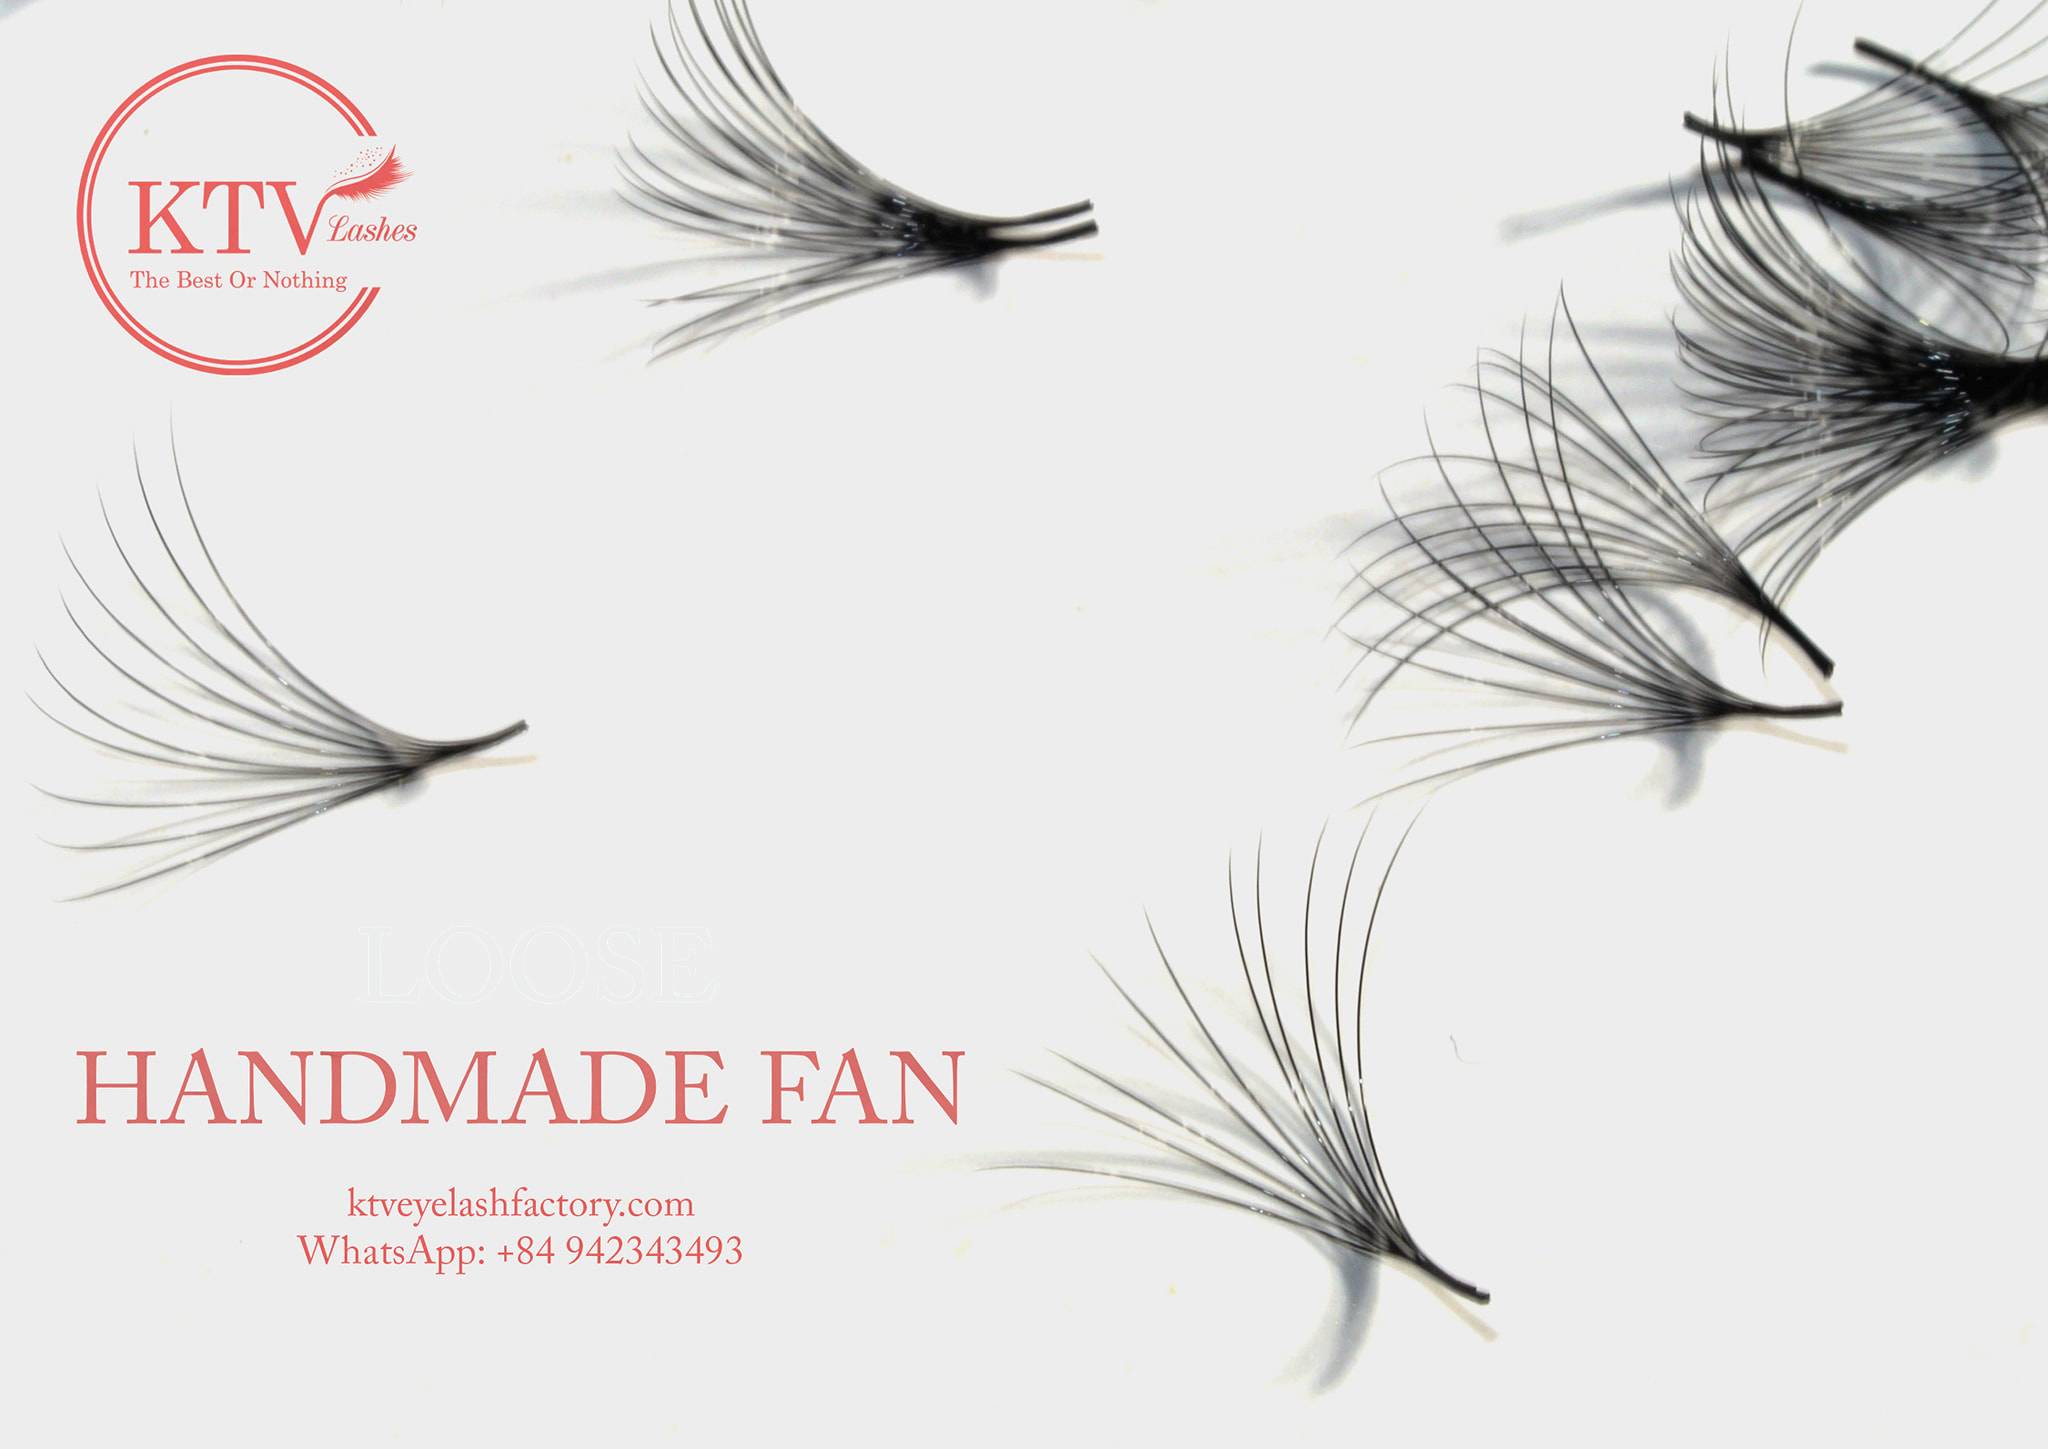 What Are The Outstanding Advantages Of Promade Lash Fans